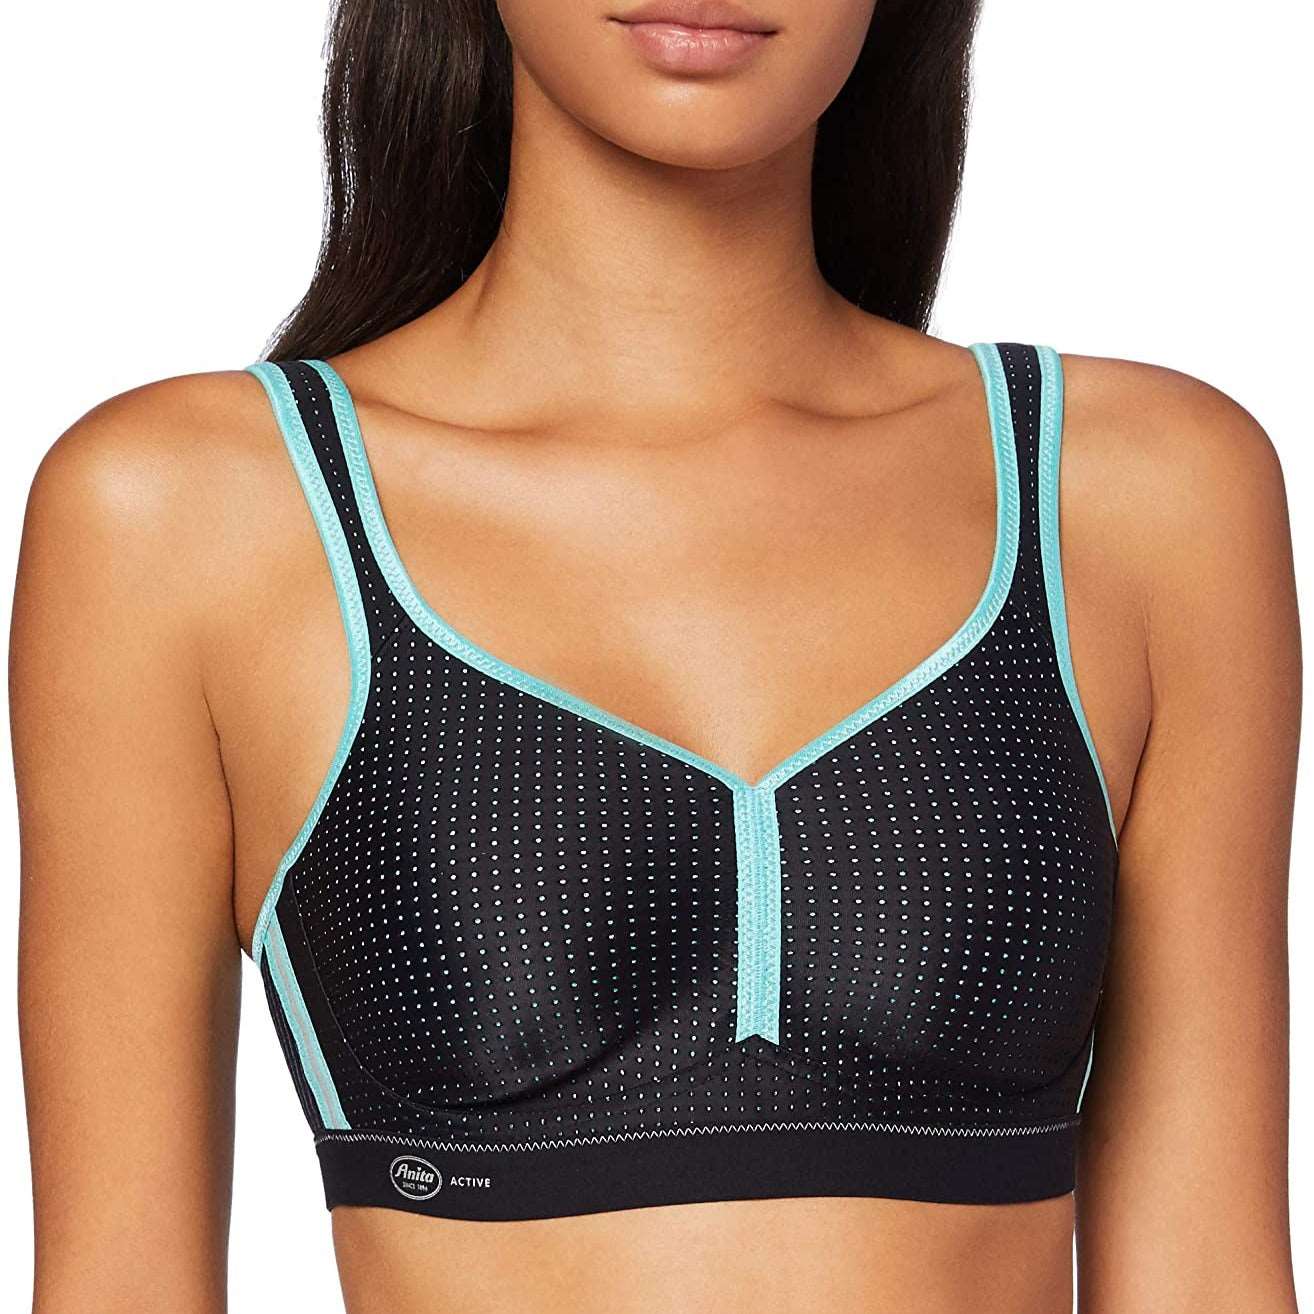 Anita Active PanAlp Delta Top Sports Bra with Cups 5562